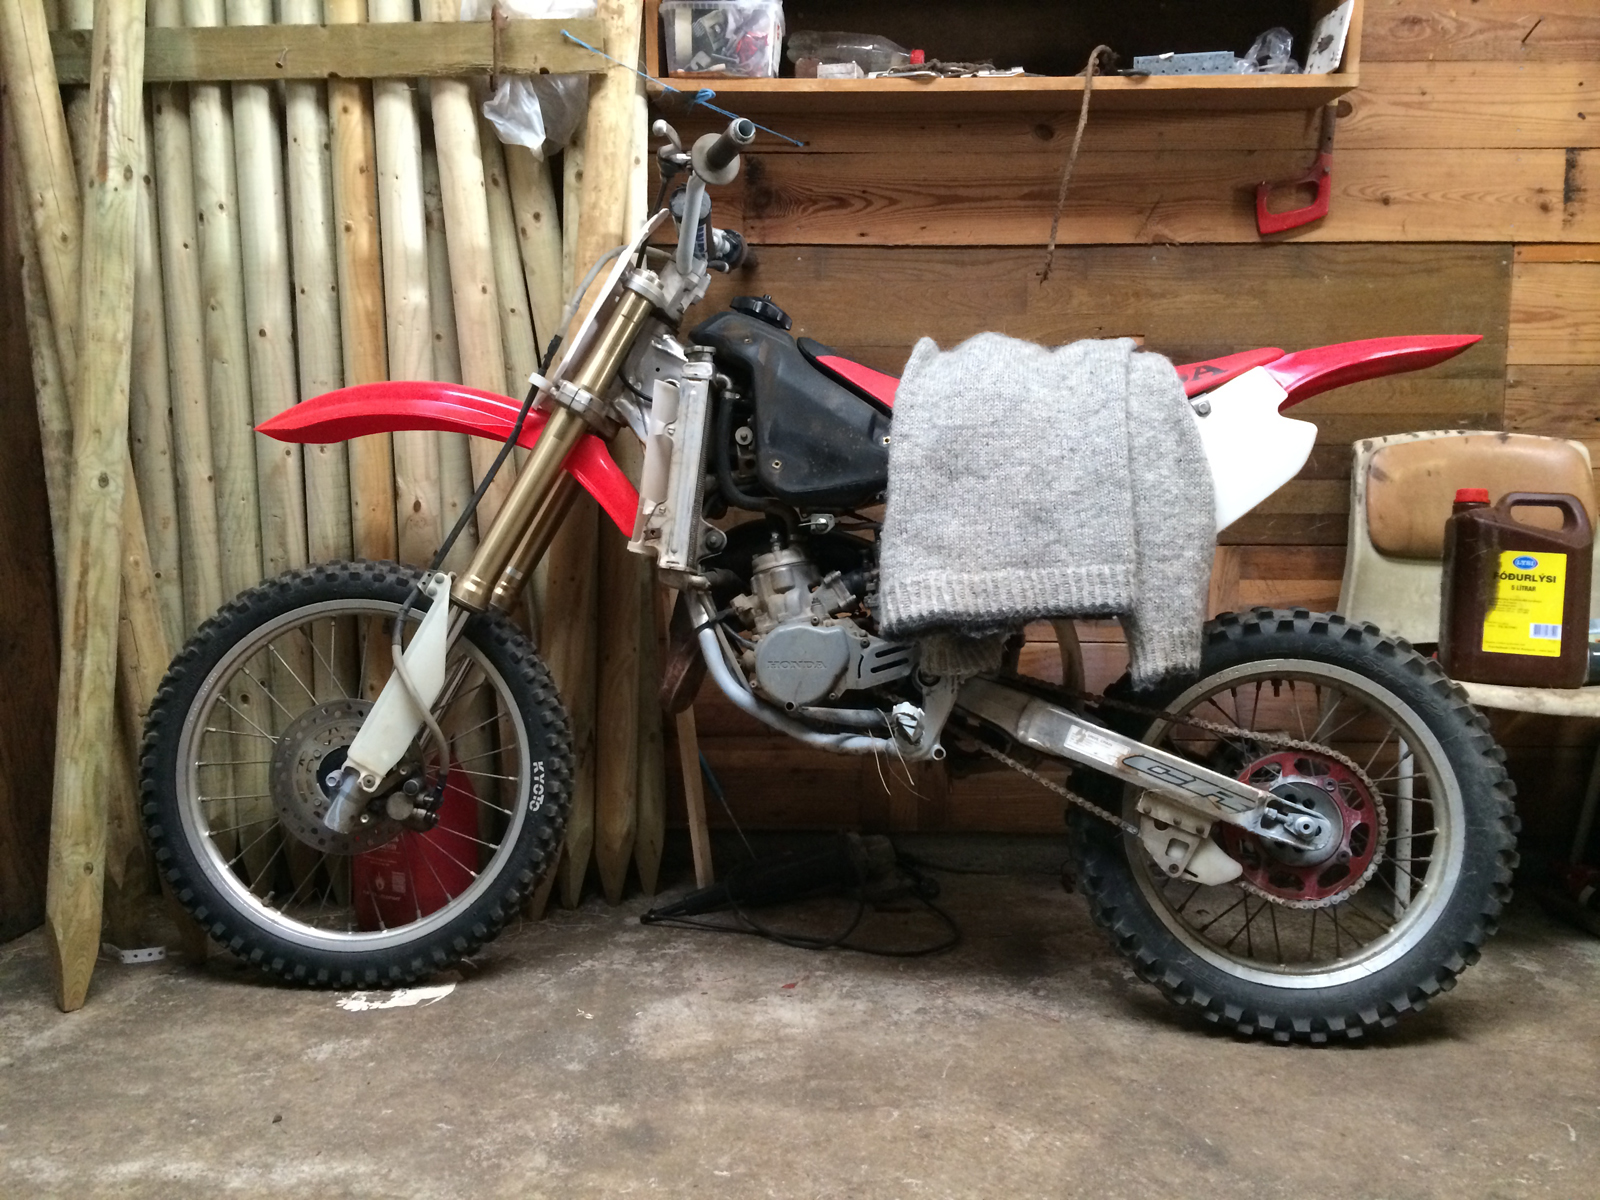 A motocross motorcycle, a sweater on the seat, leaning on a wall with staves.